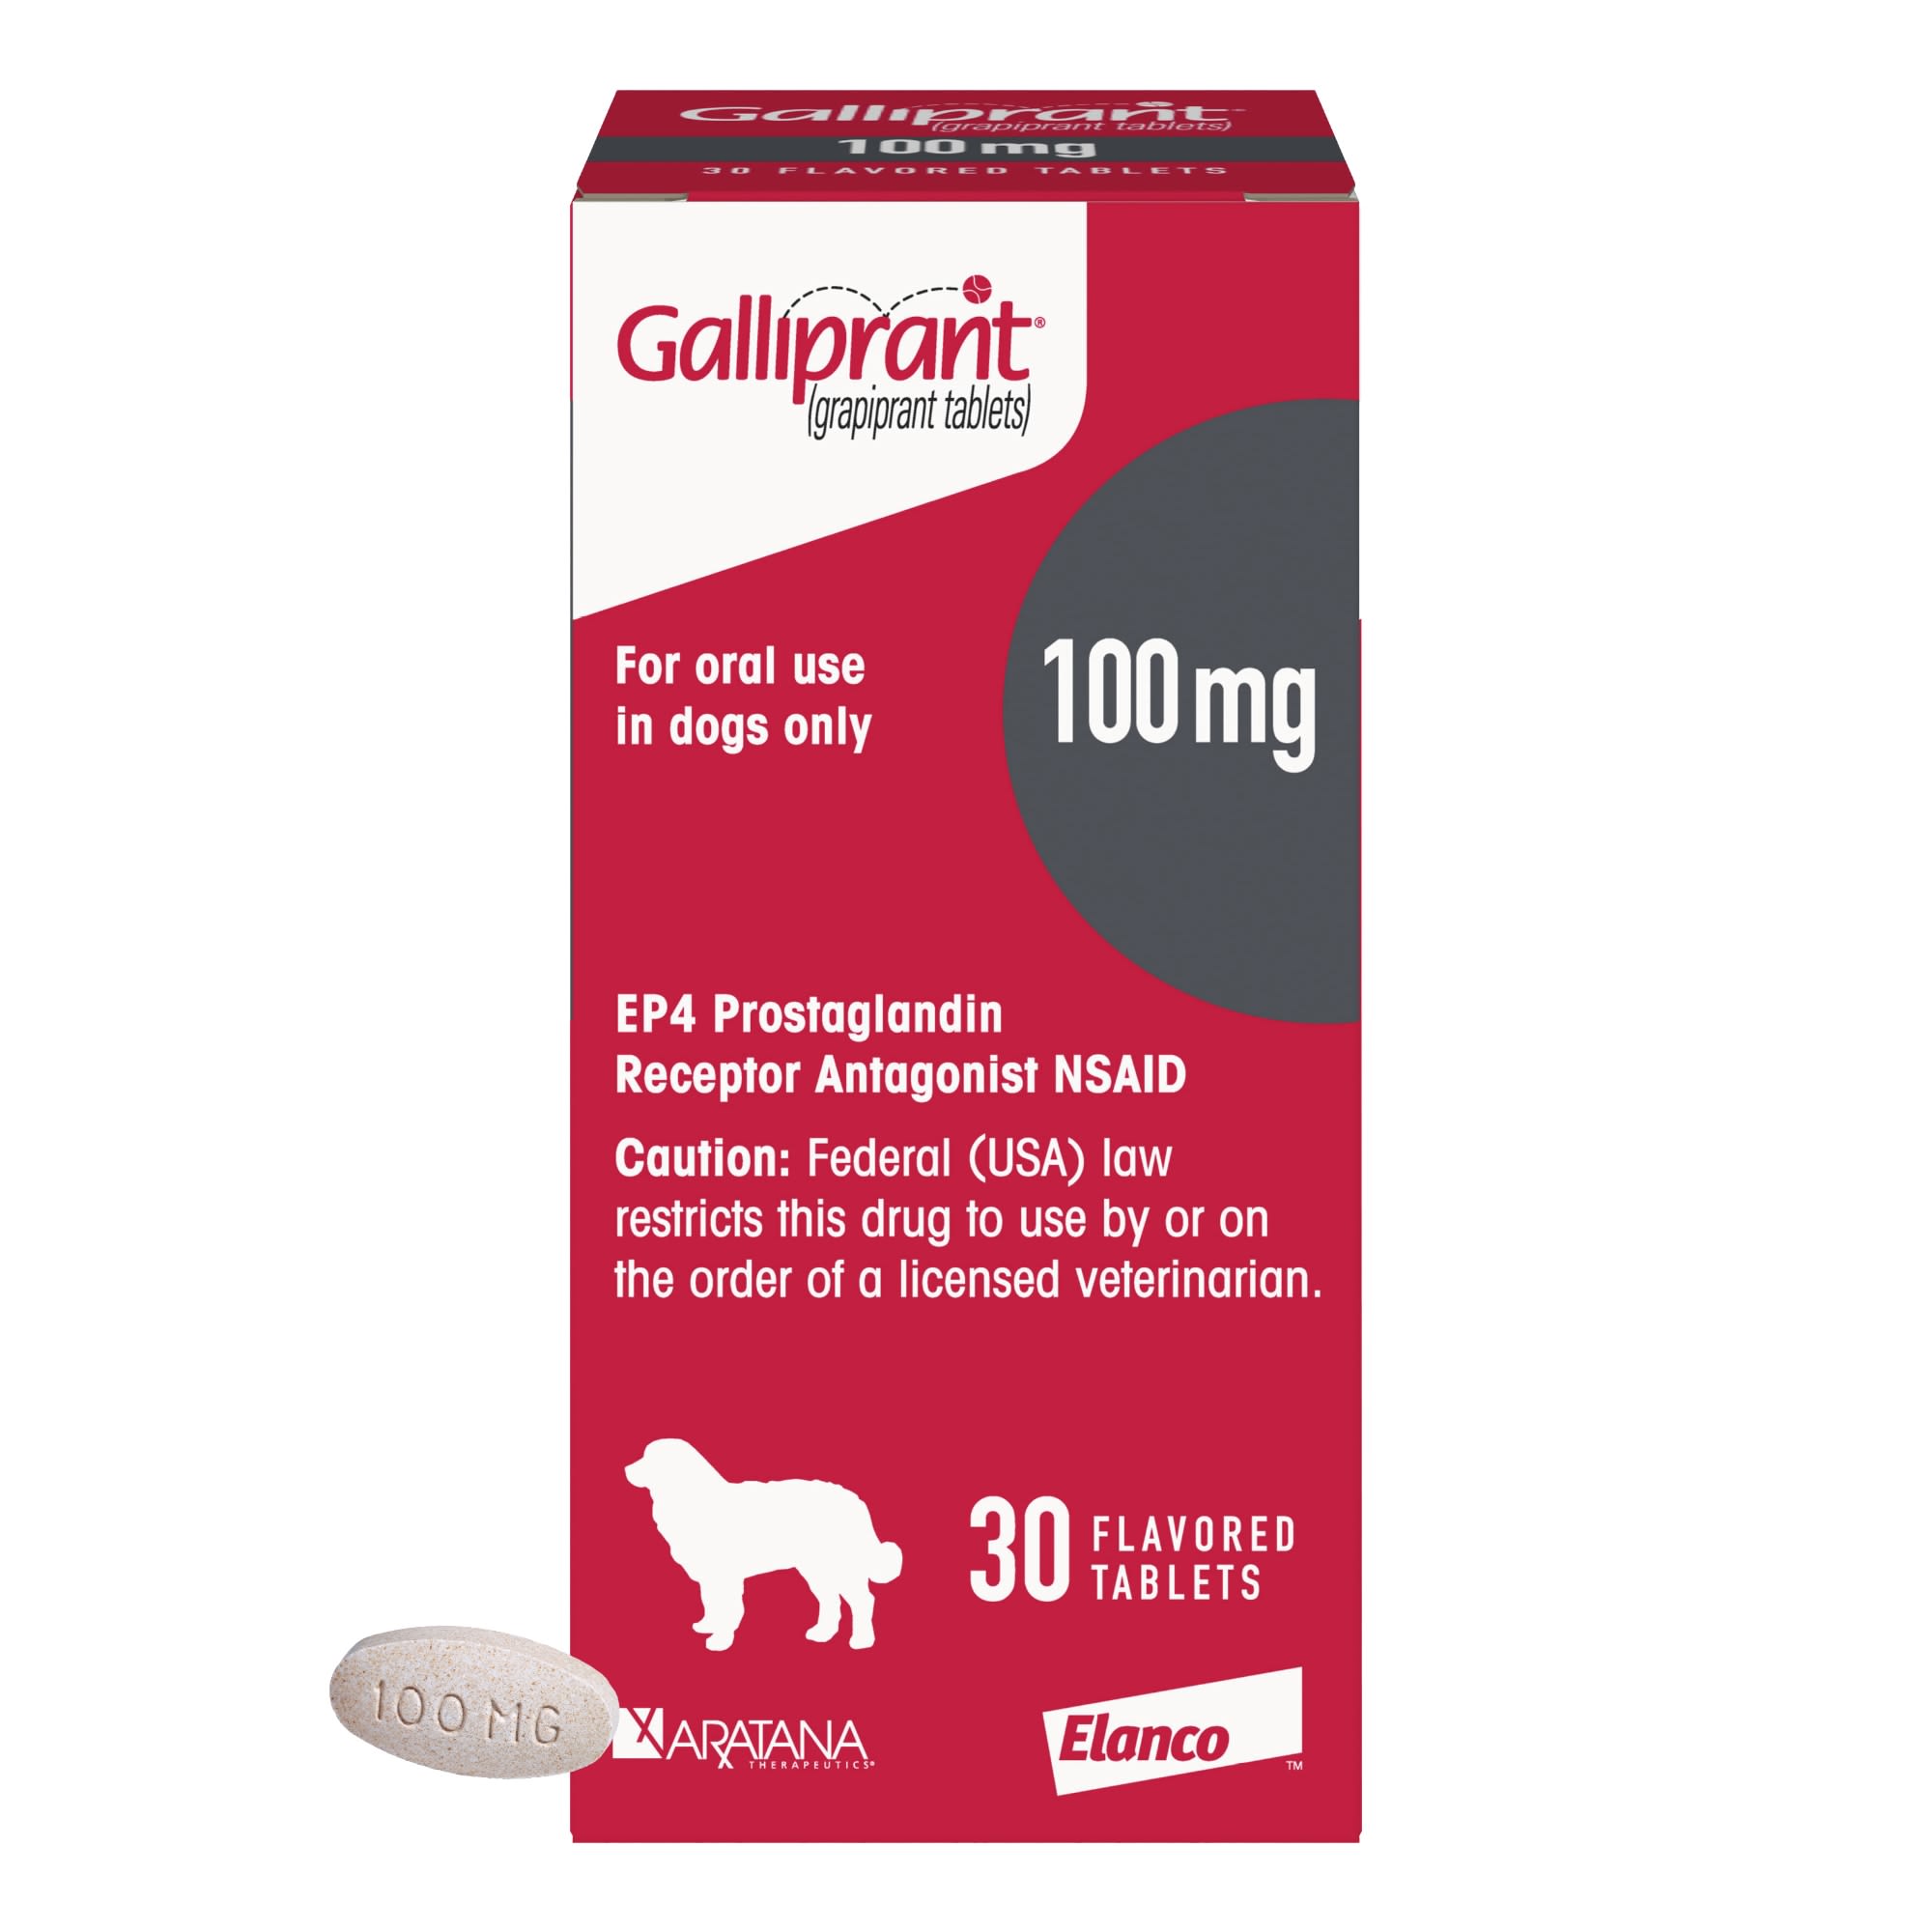 galliprant-100-mg-for-dogs-single-tablet-petco